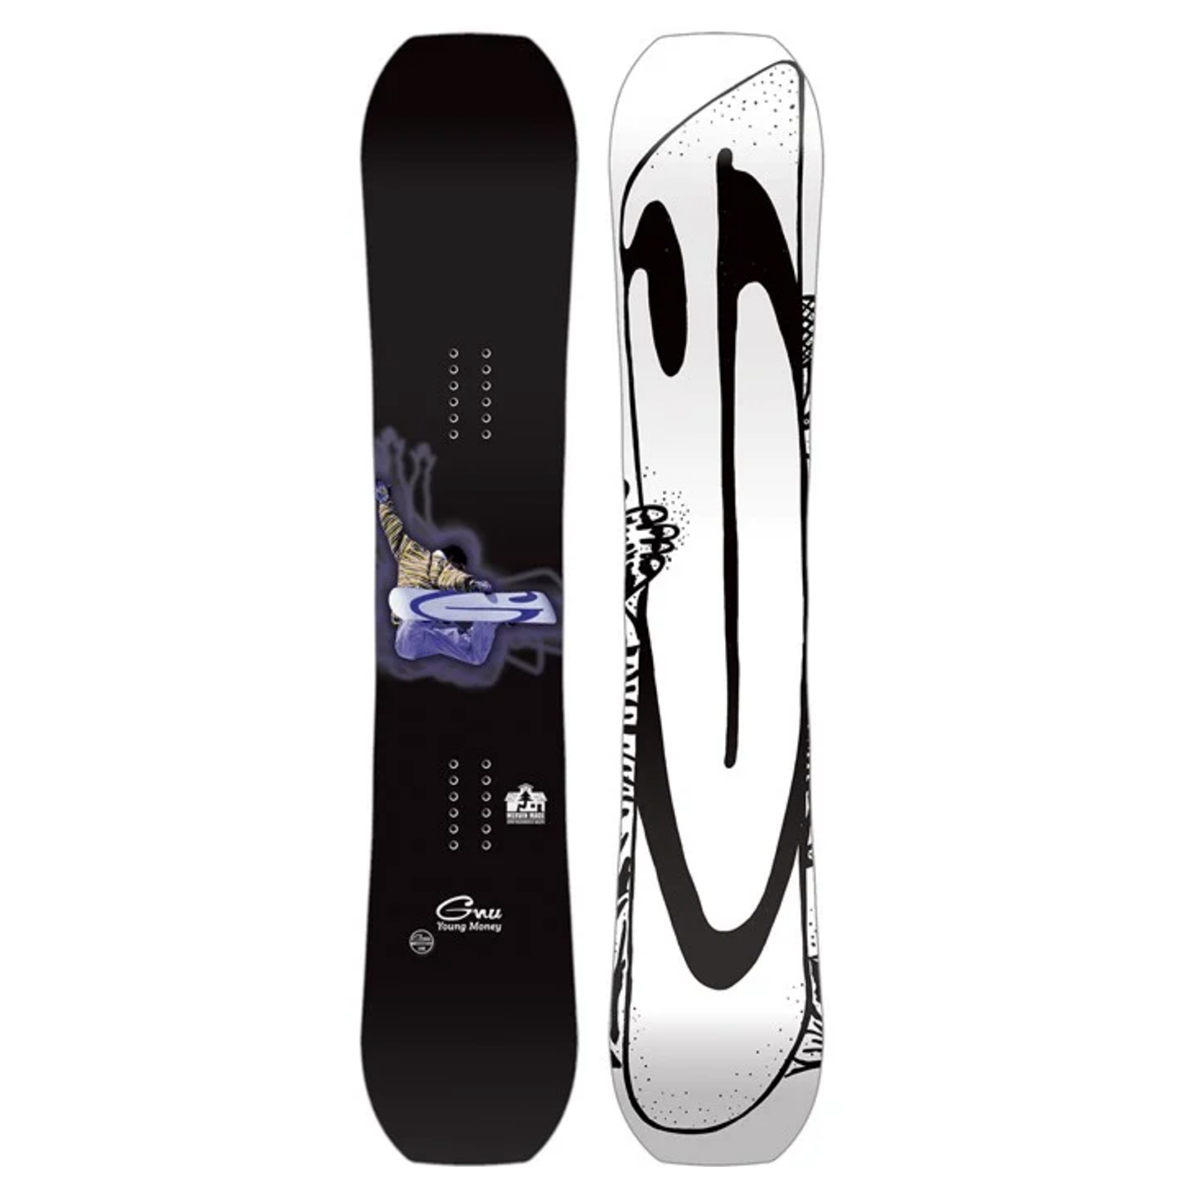 GNU 2024 Youth Young Money Snowboard - Assorted Sizes